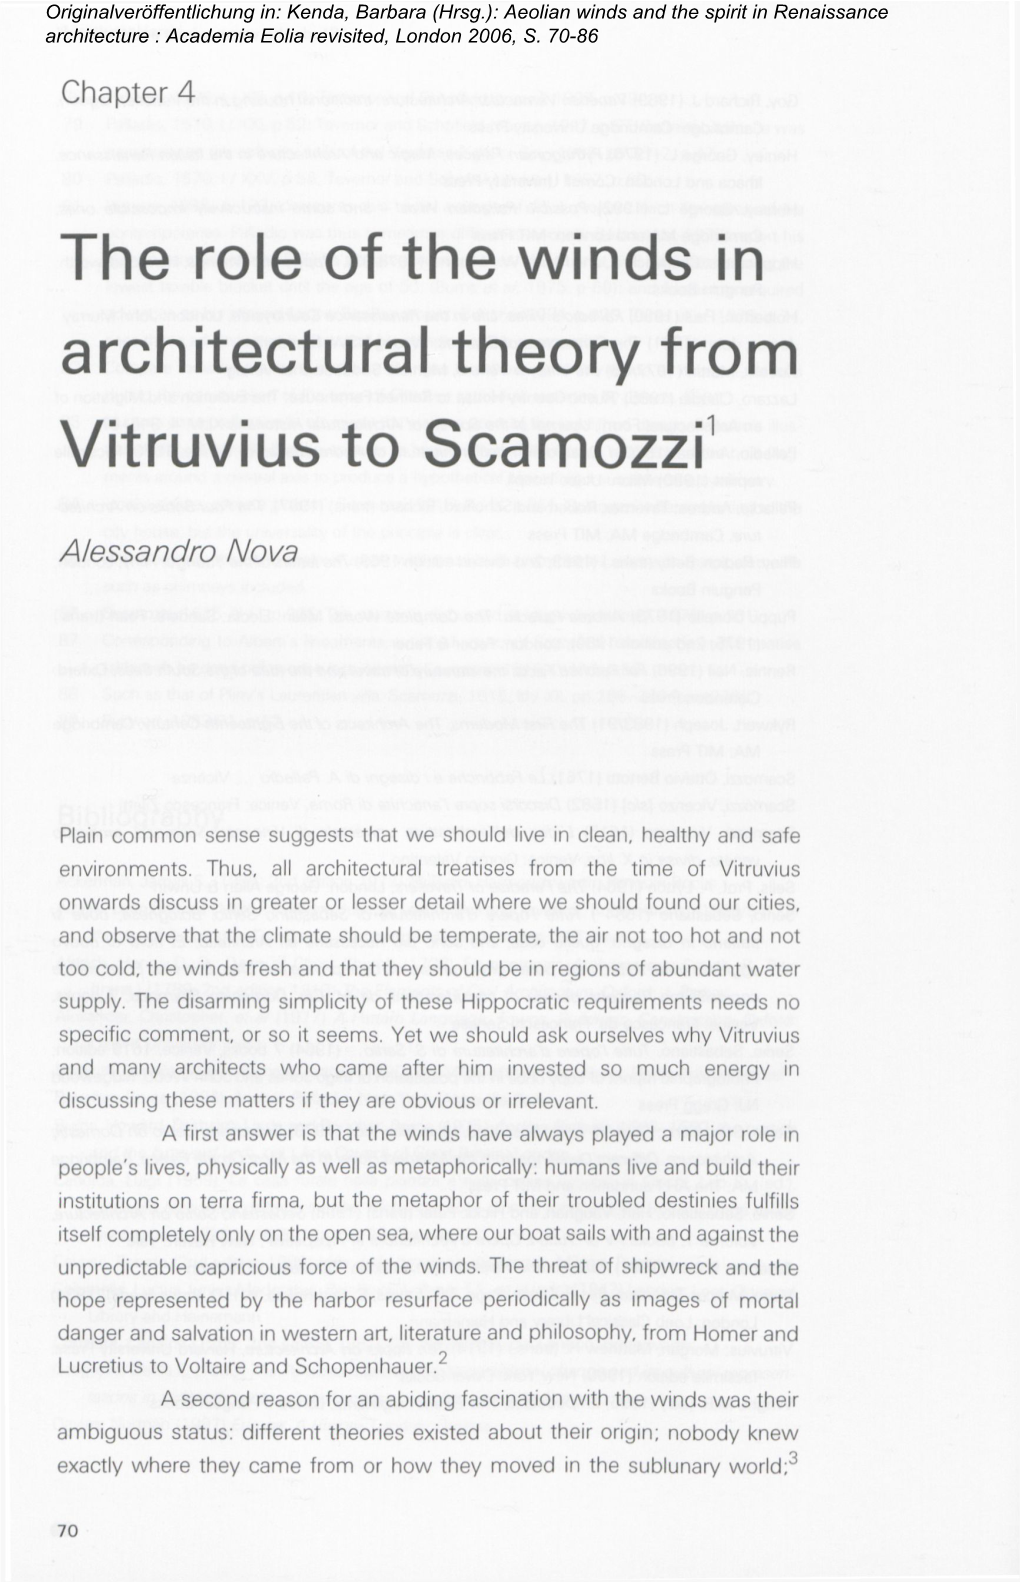 The Role of the Winds in Architectural Theory from Vitruvius to Scamozzi1